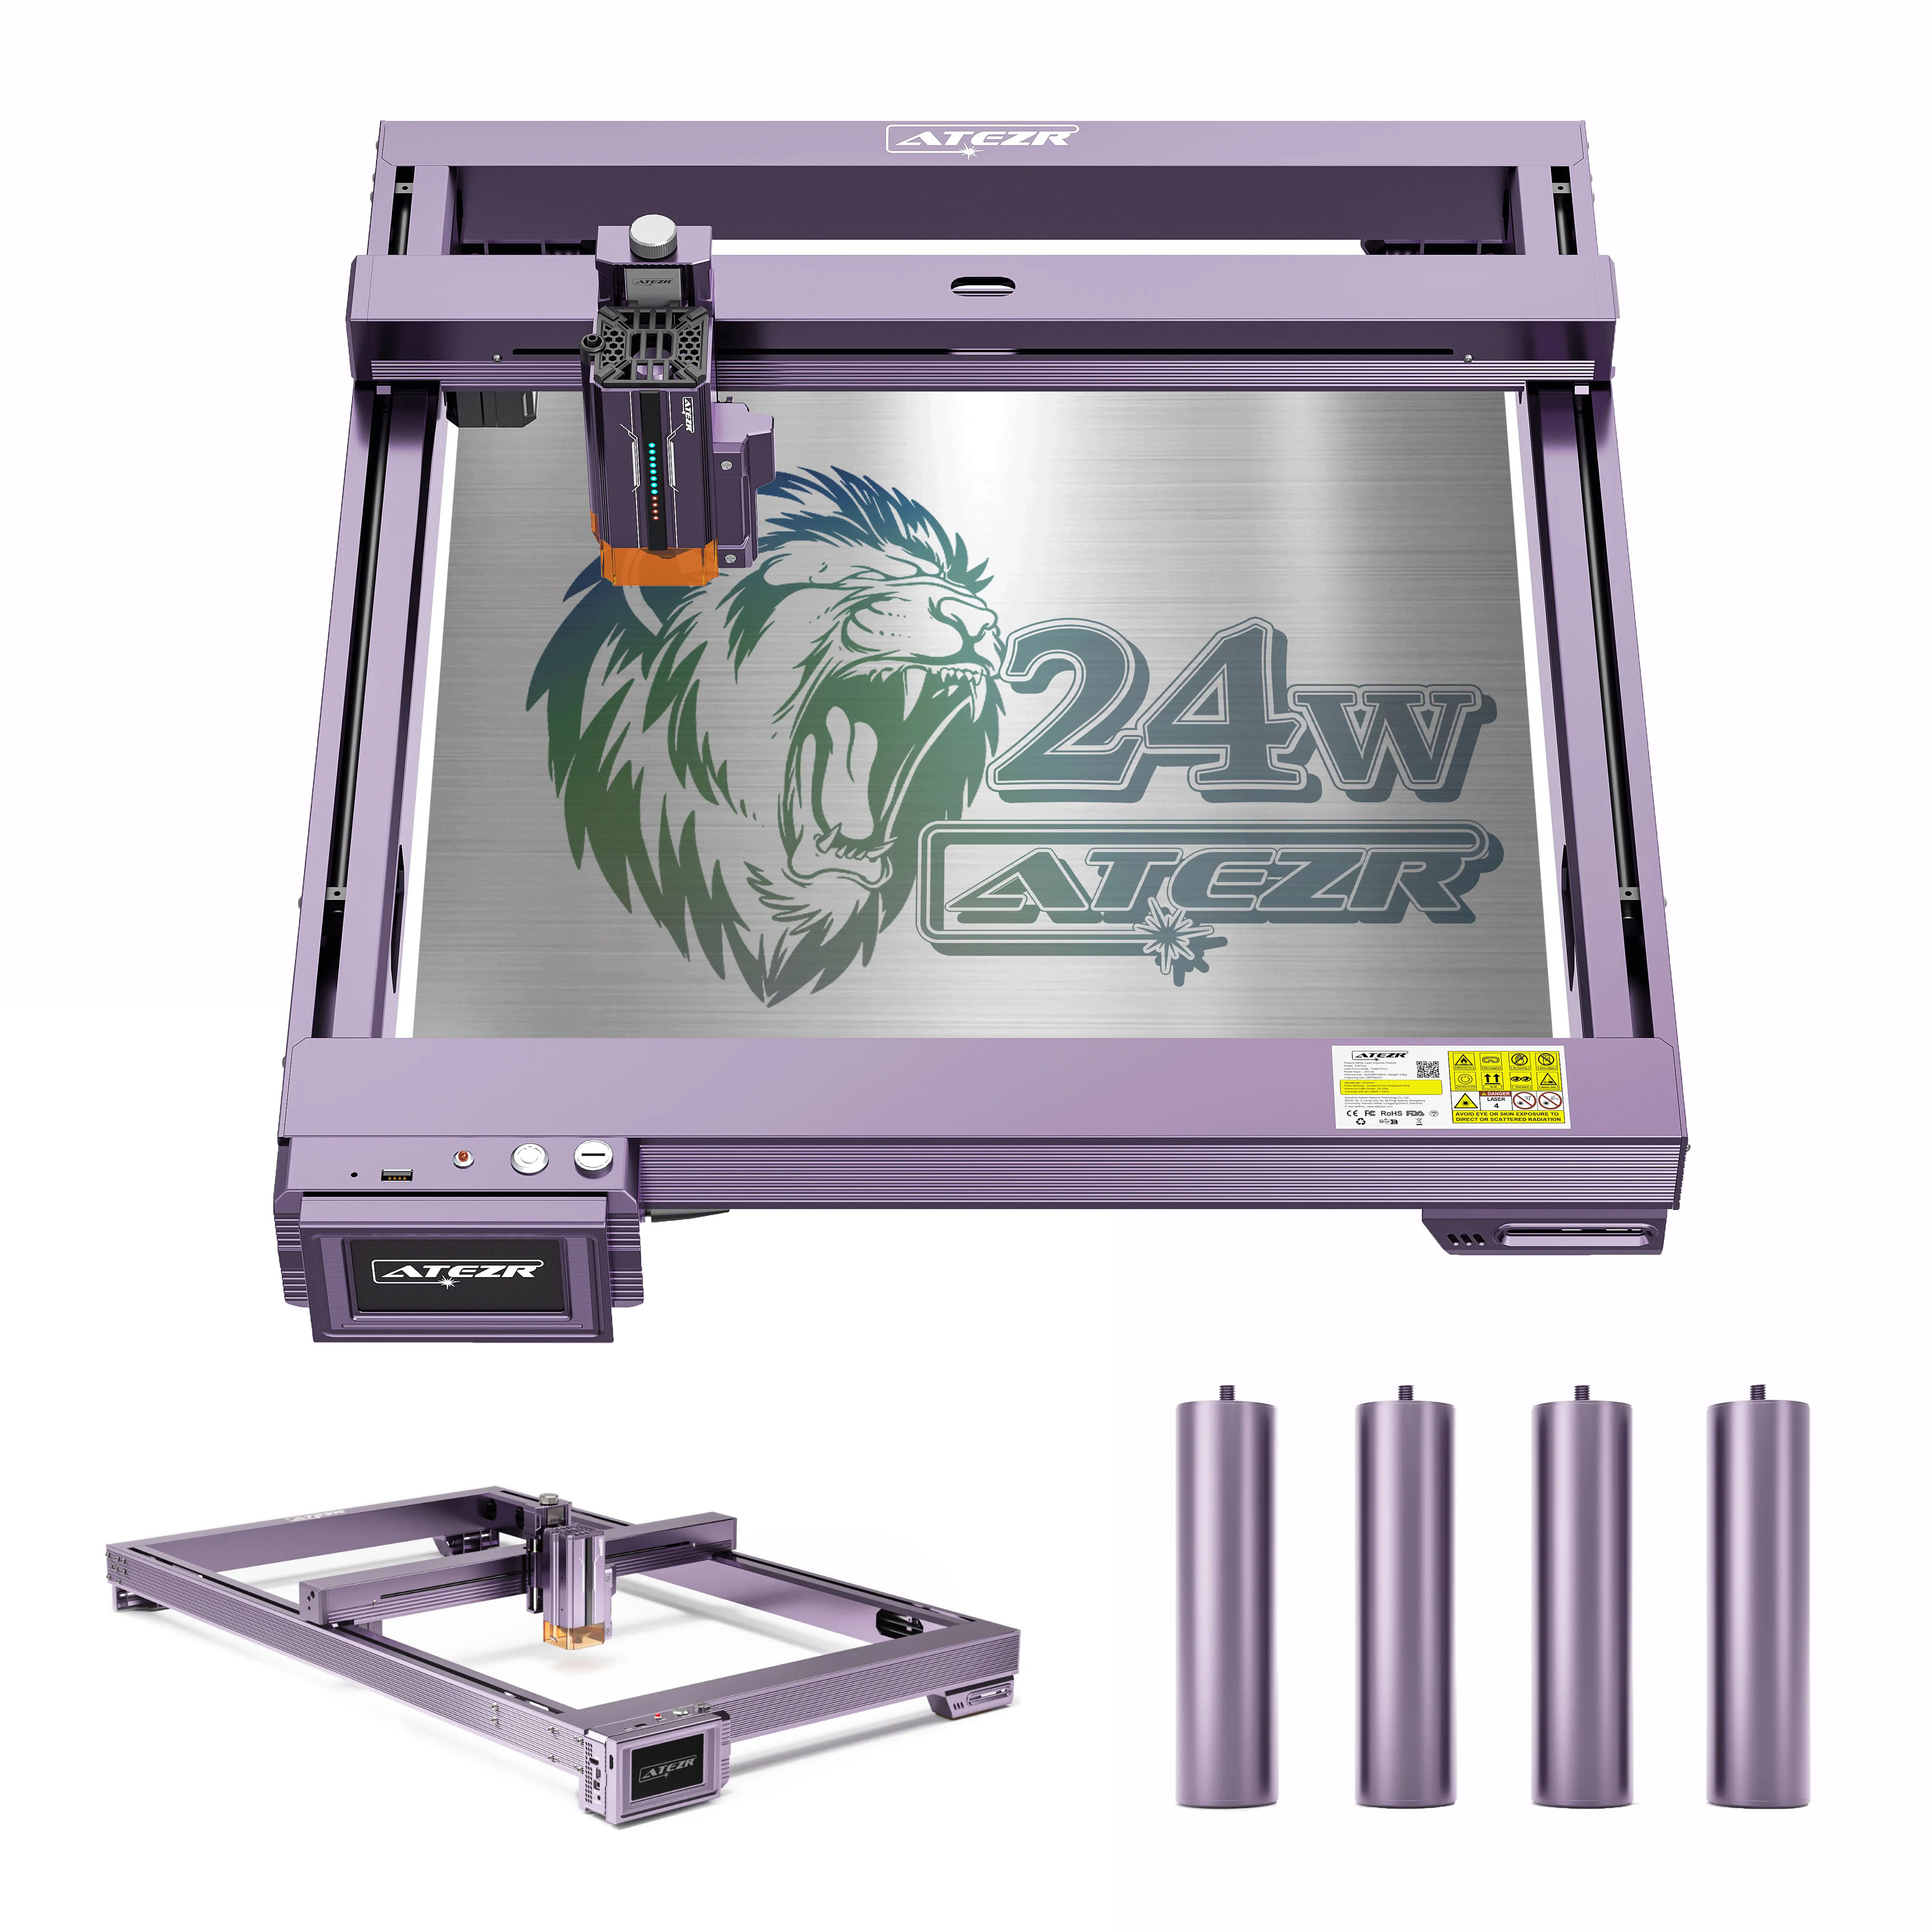 Atezr Ι Laser Engraver & Accessories Ι Aesthetics. Powerful. Stable